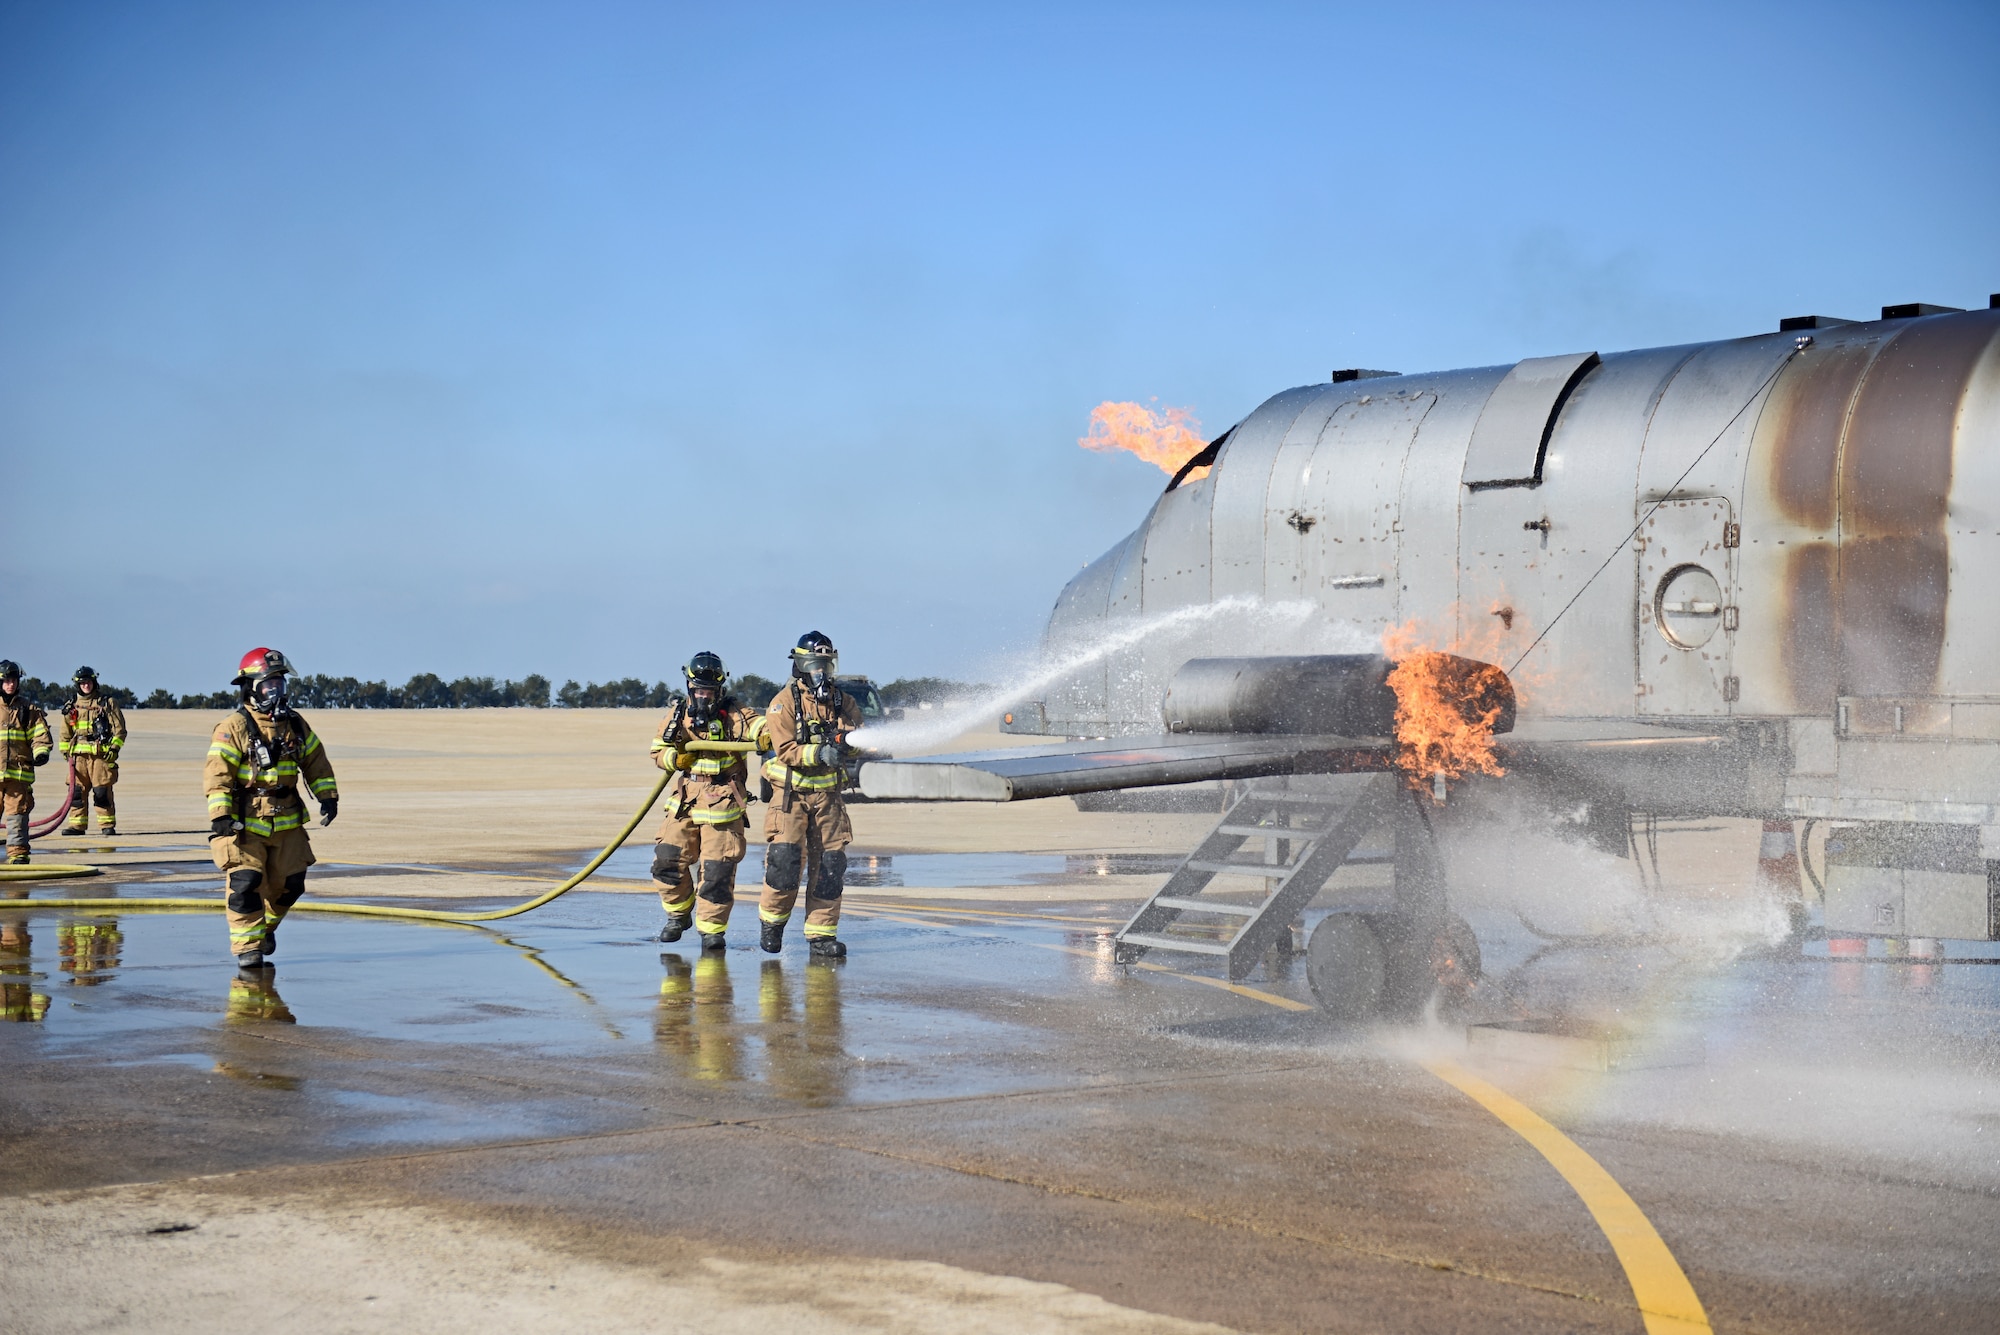 U.S. Air Force firefighters assigned to the 8th Civil Engineer Squadron conduct live aircraft fire training at Kunsan Air Base, Republic of Korea, Nov. 20, 2019. Live aircraft fire training ensures 8th CES firefighters are proficient in the steps needed to properly fight aircraft fires. (U.S. Air Force photo by Staff Sgt. Mackenzie Mendez)